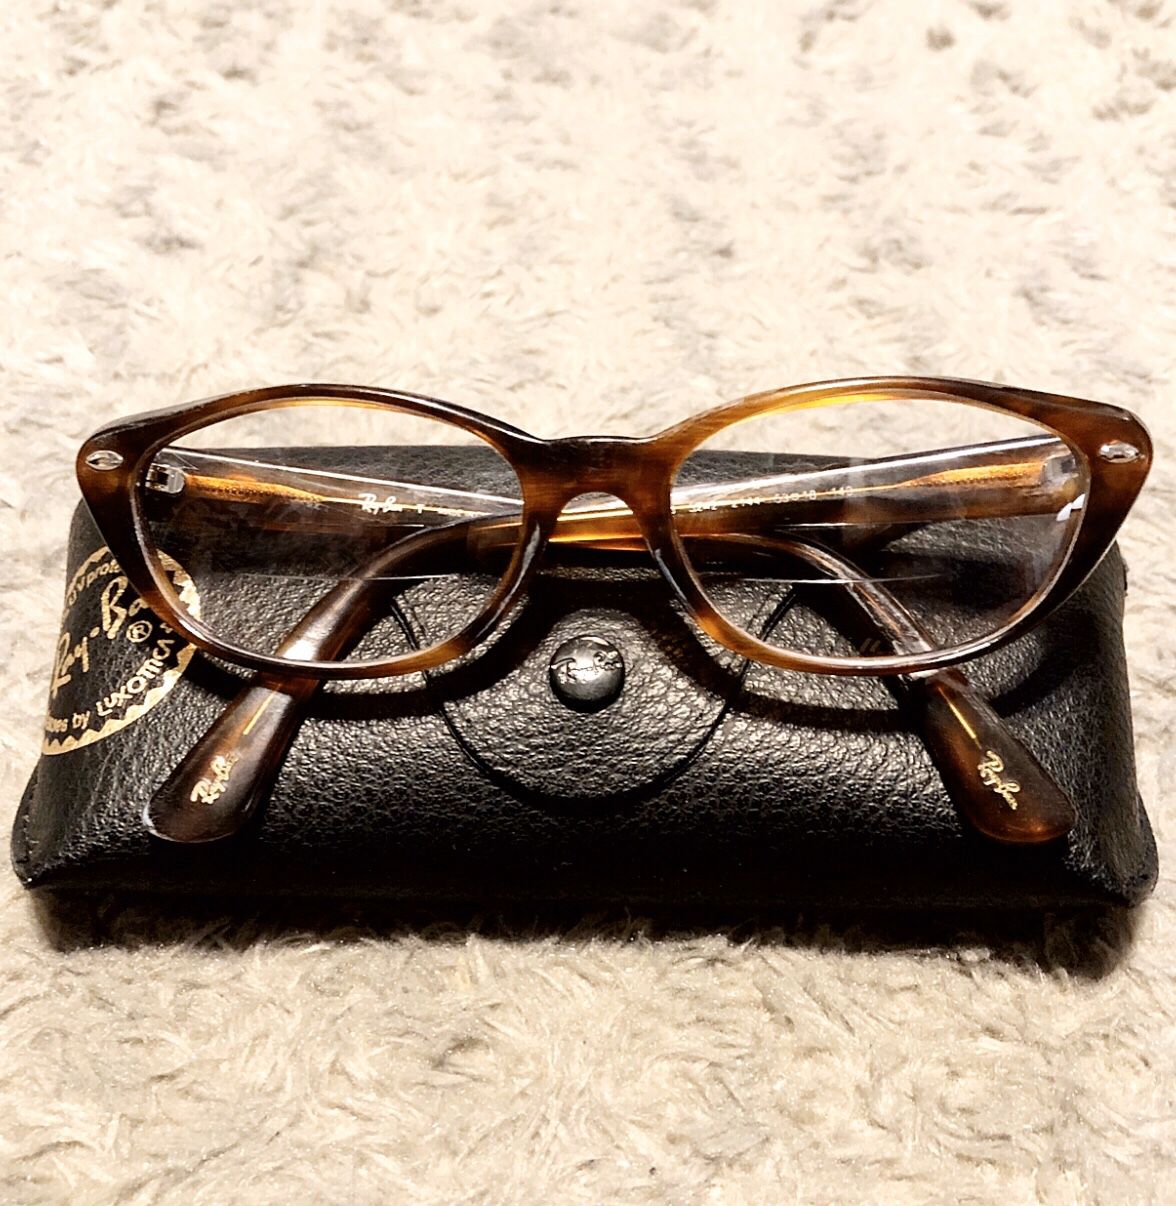 Vintage Ray Ban cat eye glasses retail $190 Great condition! No scratches needs to be cleaned. Color brown Style# 5242 Cena Heritage Malta.